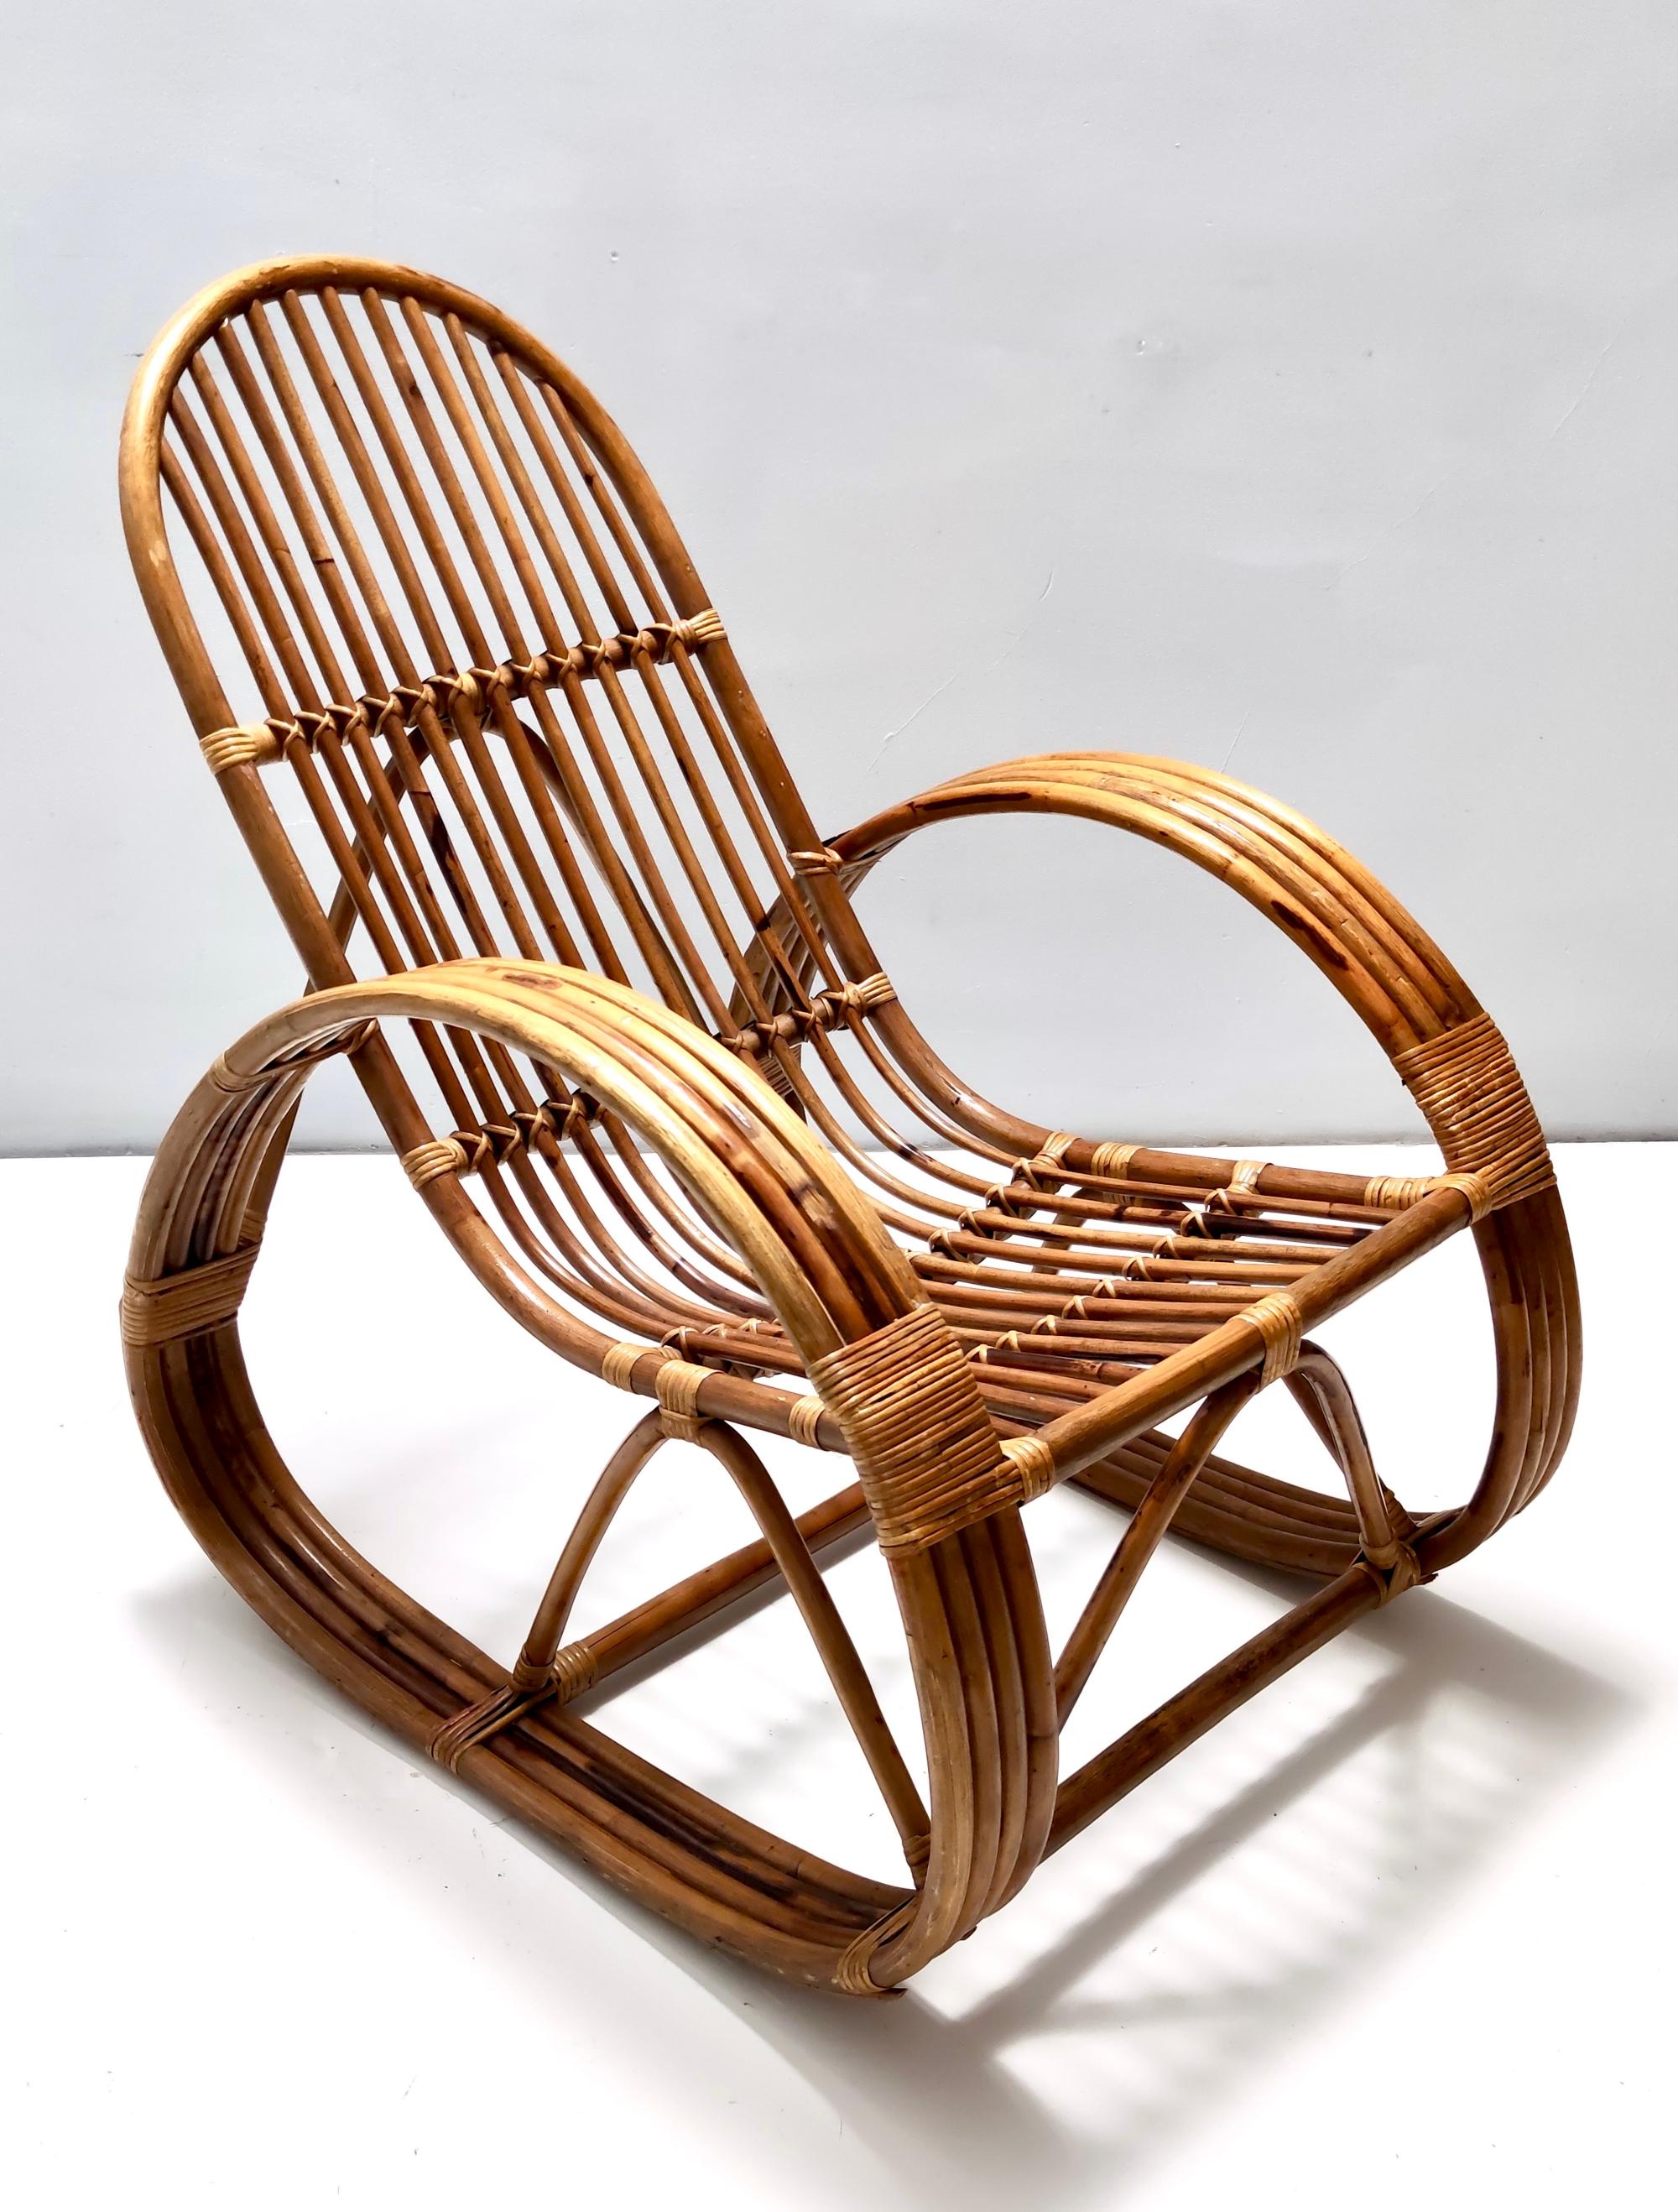 Made in Italy, 1970s. 
This rocking chair features a bamboo frame and its patterned fabric cushion, which has a soft padding and has no stains or flaws.
It is vintage, therefore it might show slight traces of use, but it can be considered as in very